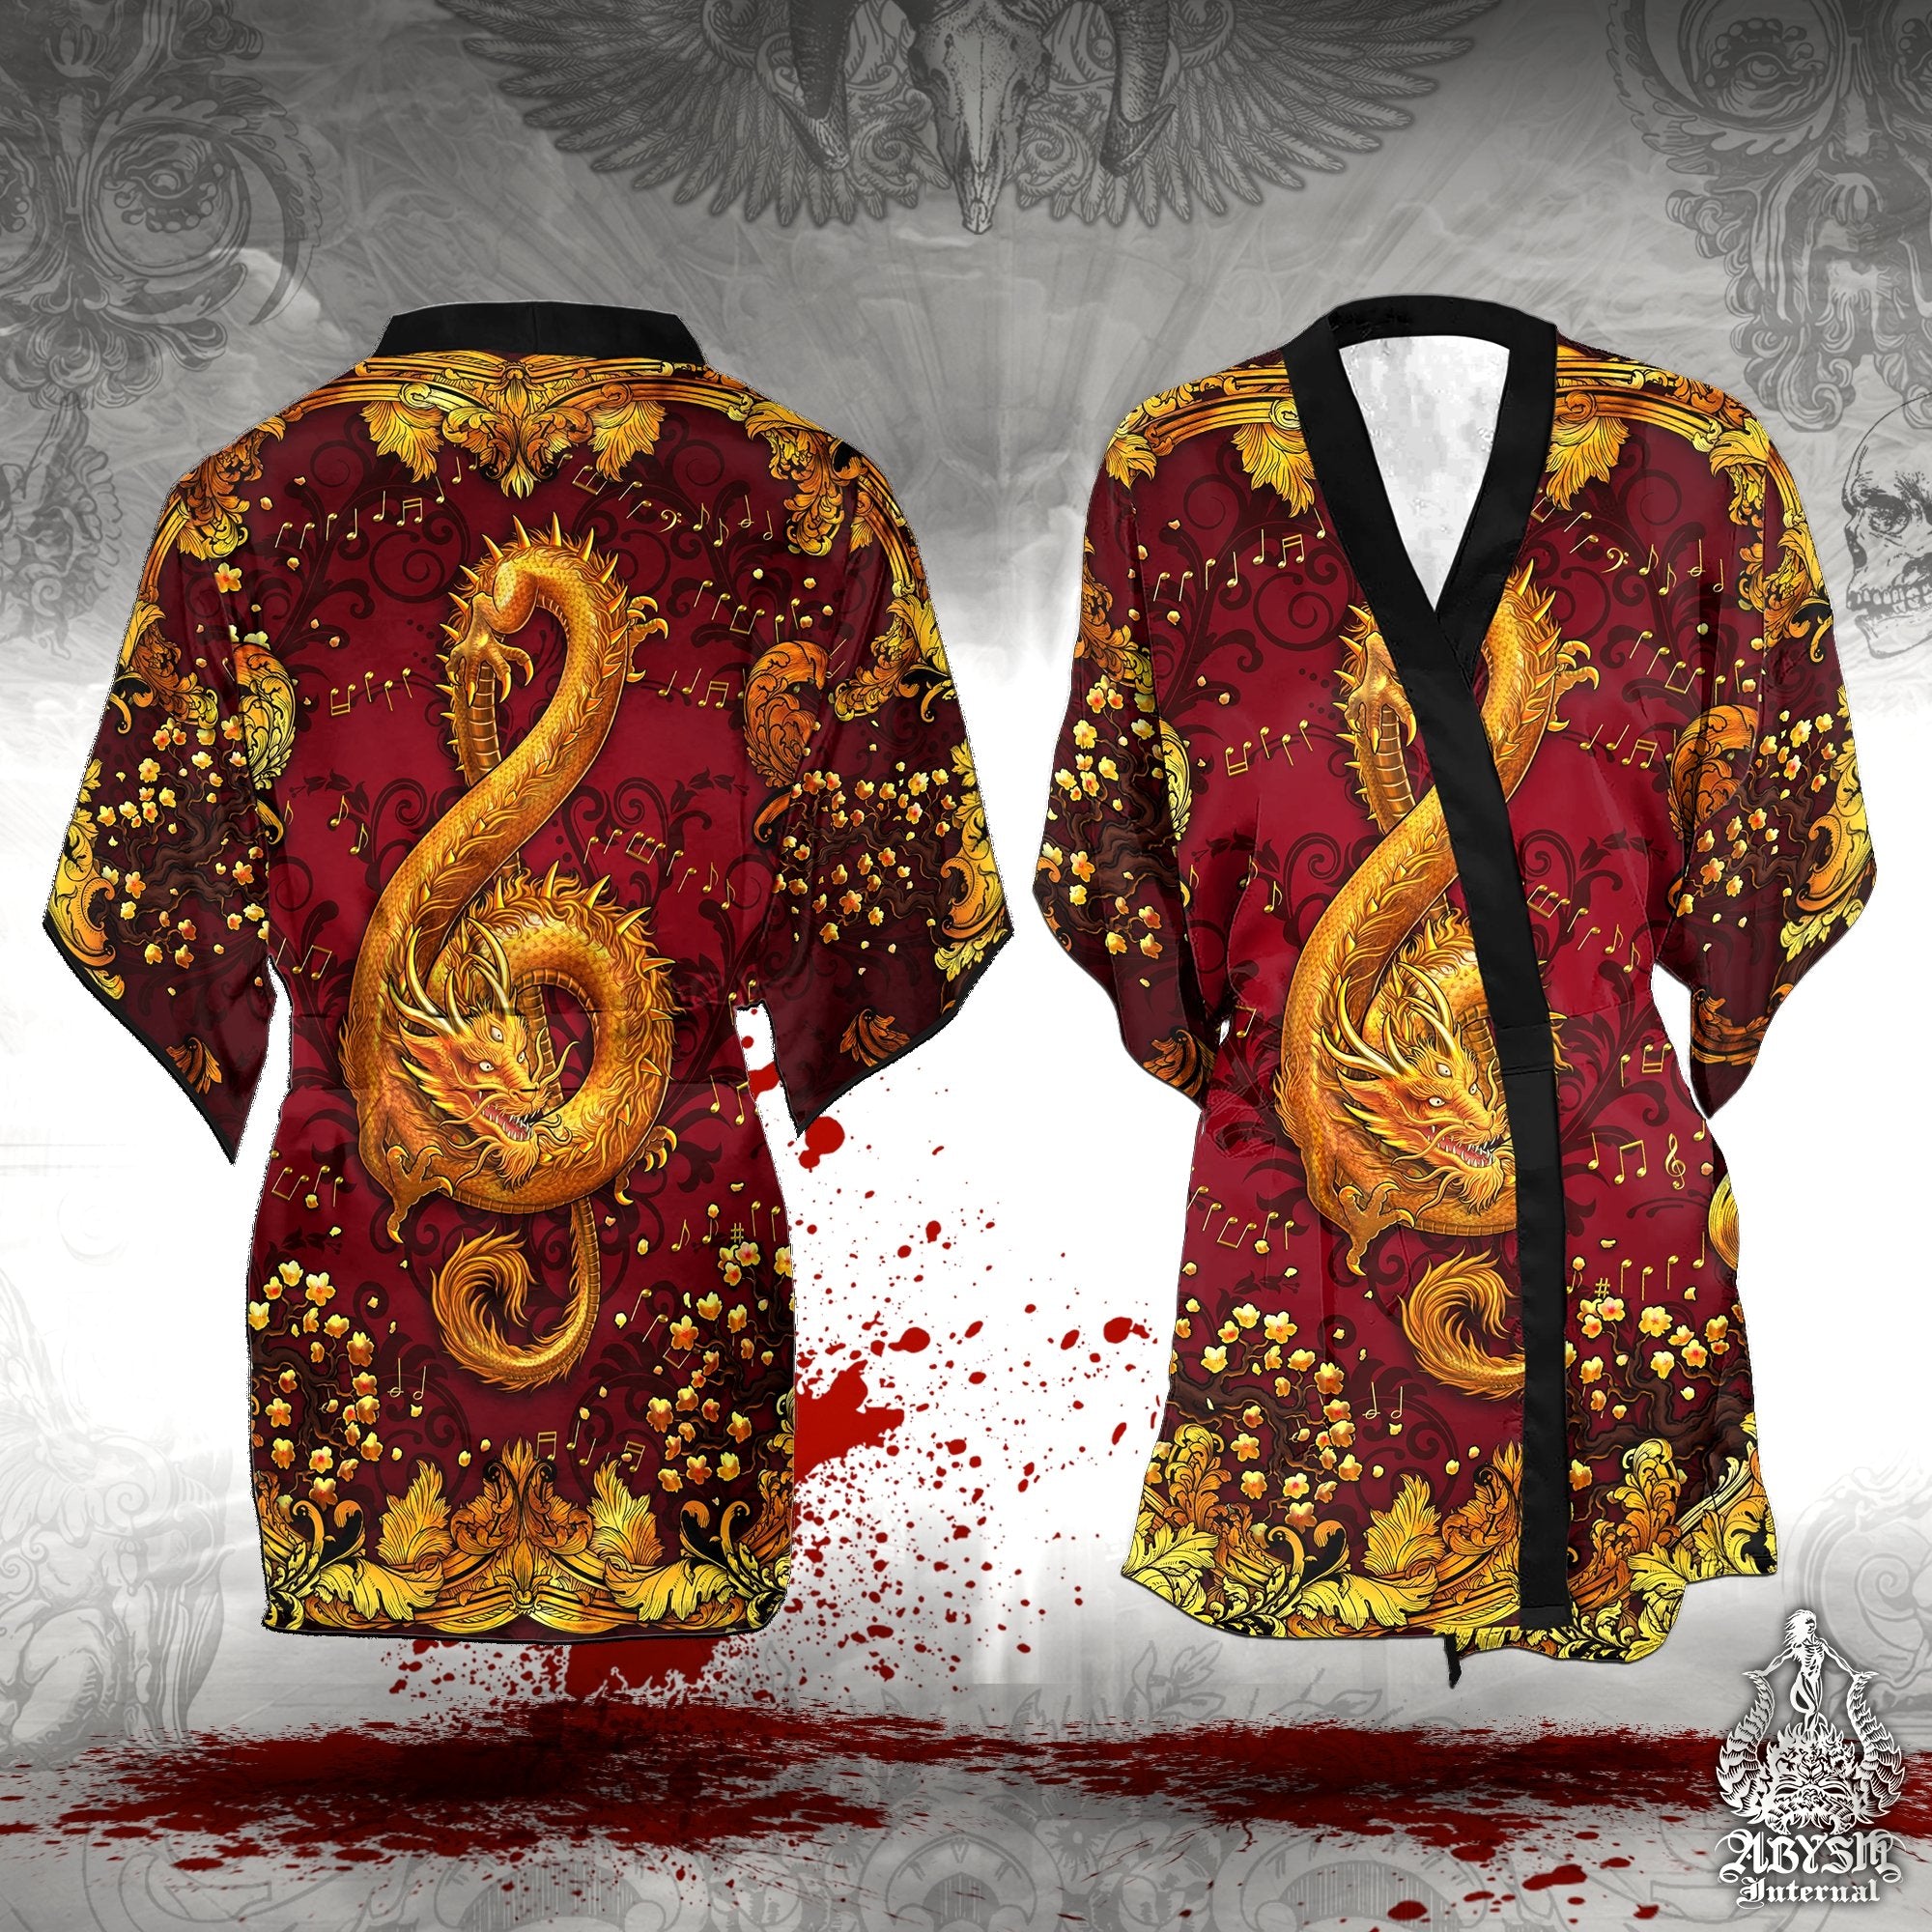 Music Cover Up, Beach Outfit, Party Kimono, Summer Festival Robe, Indie and Alternative Clothing, Unisex - Dragon, Gold Red - Abysm Internal